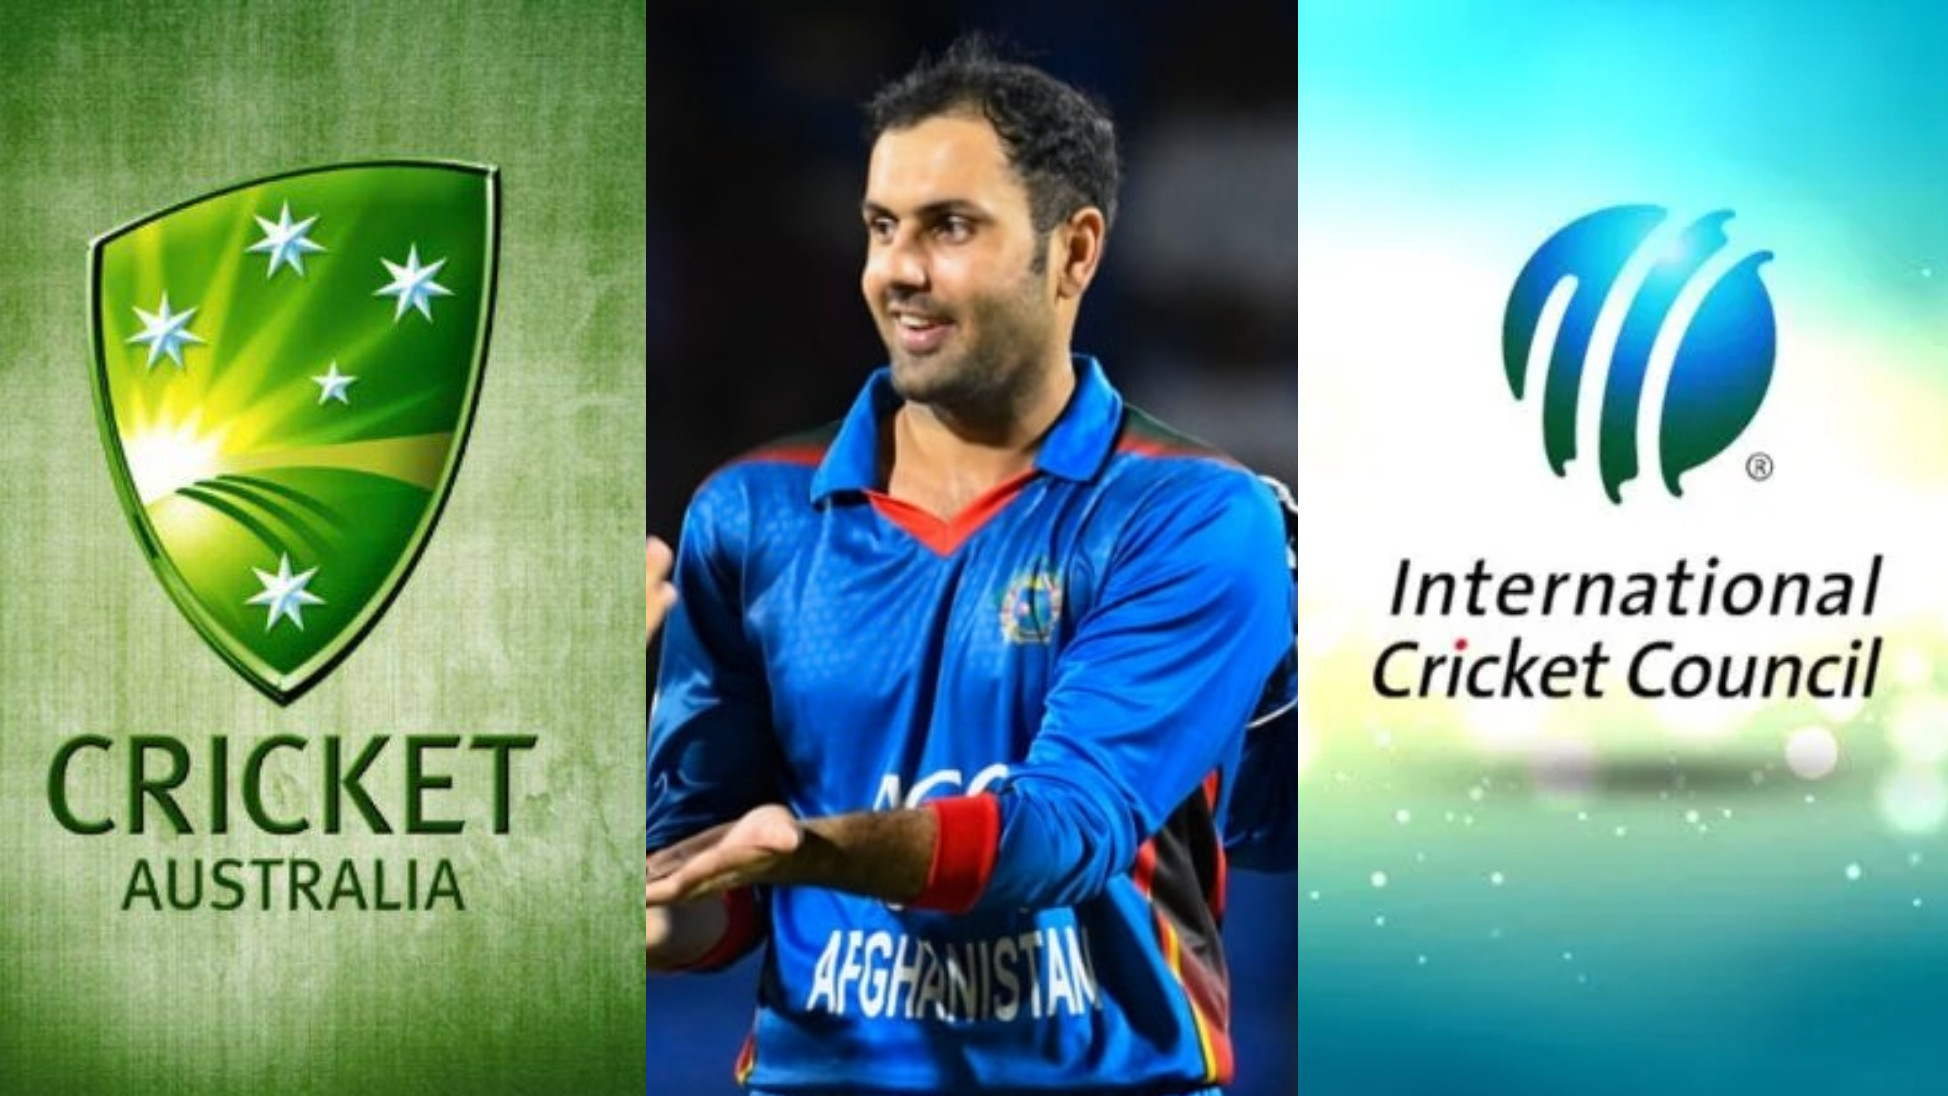 Mohammad Nabi dares Australia to play Afghanistan in 2023 World Cup; ICC set to take action against Afghan board- Report